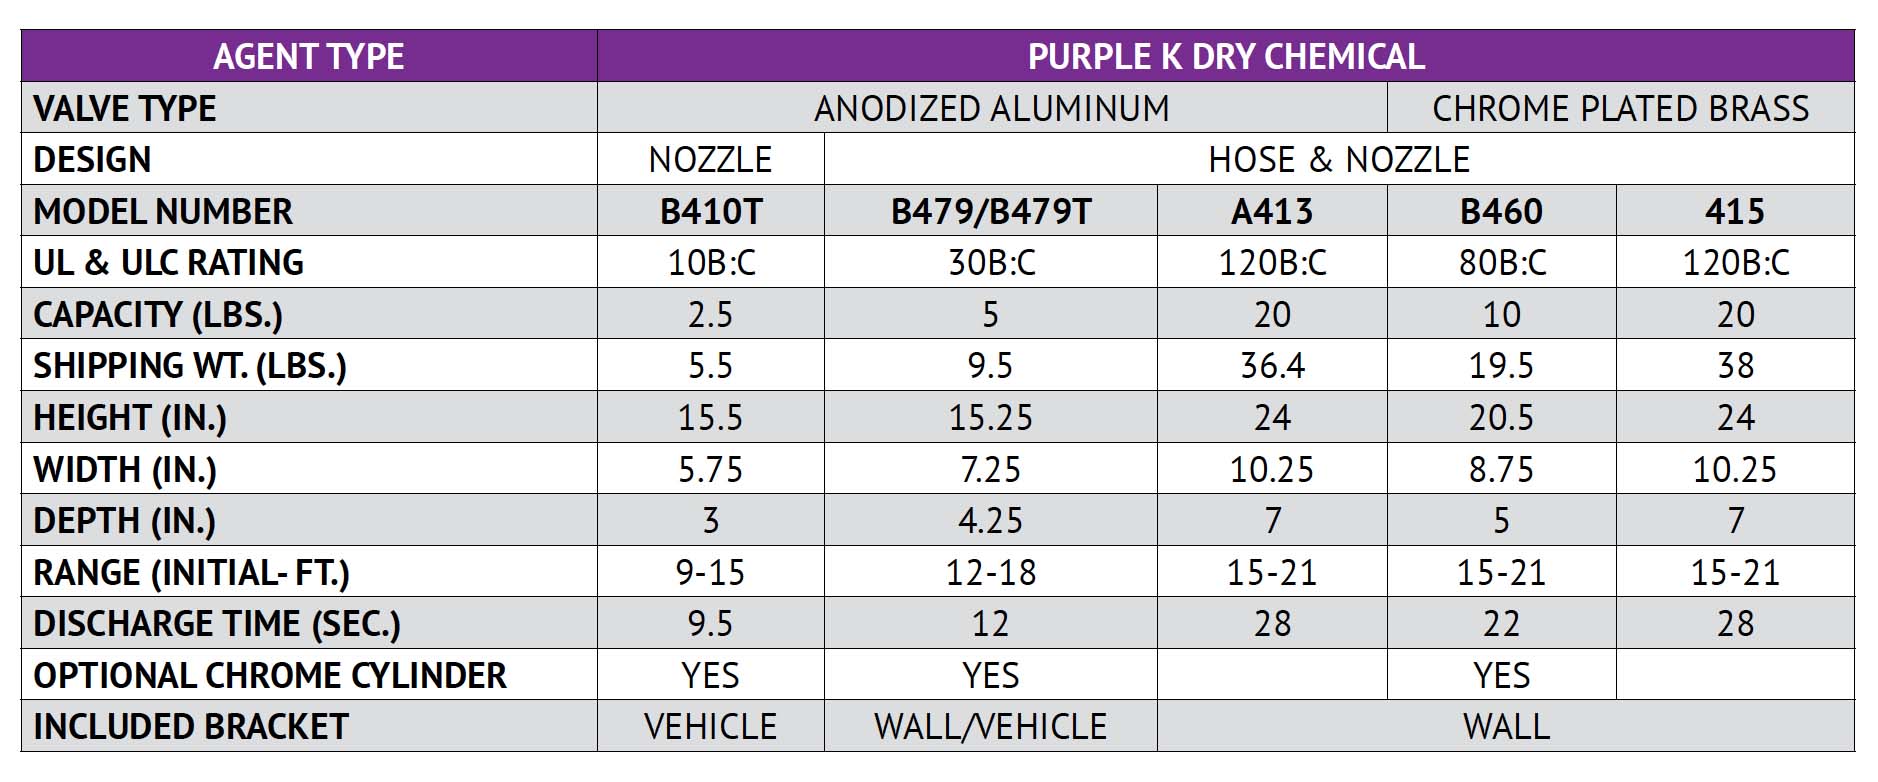 Purple K Dry Chemical chart THE FIRE SAFETY GUYS